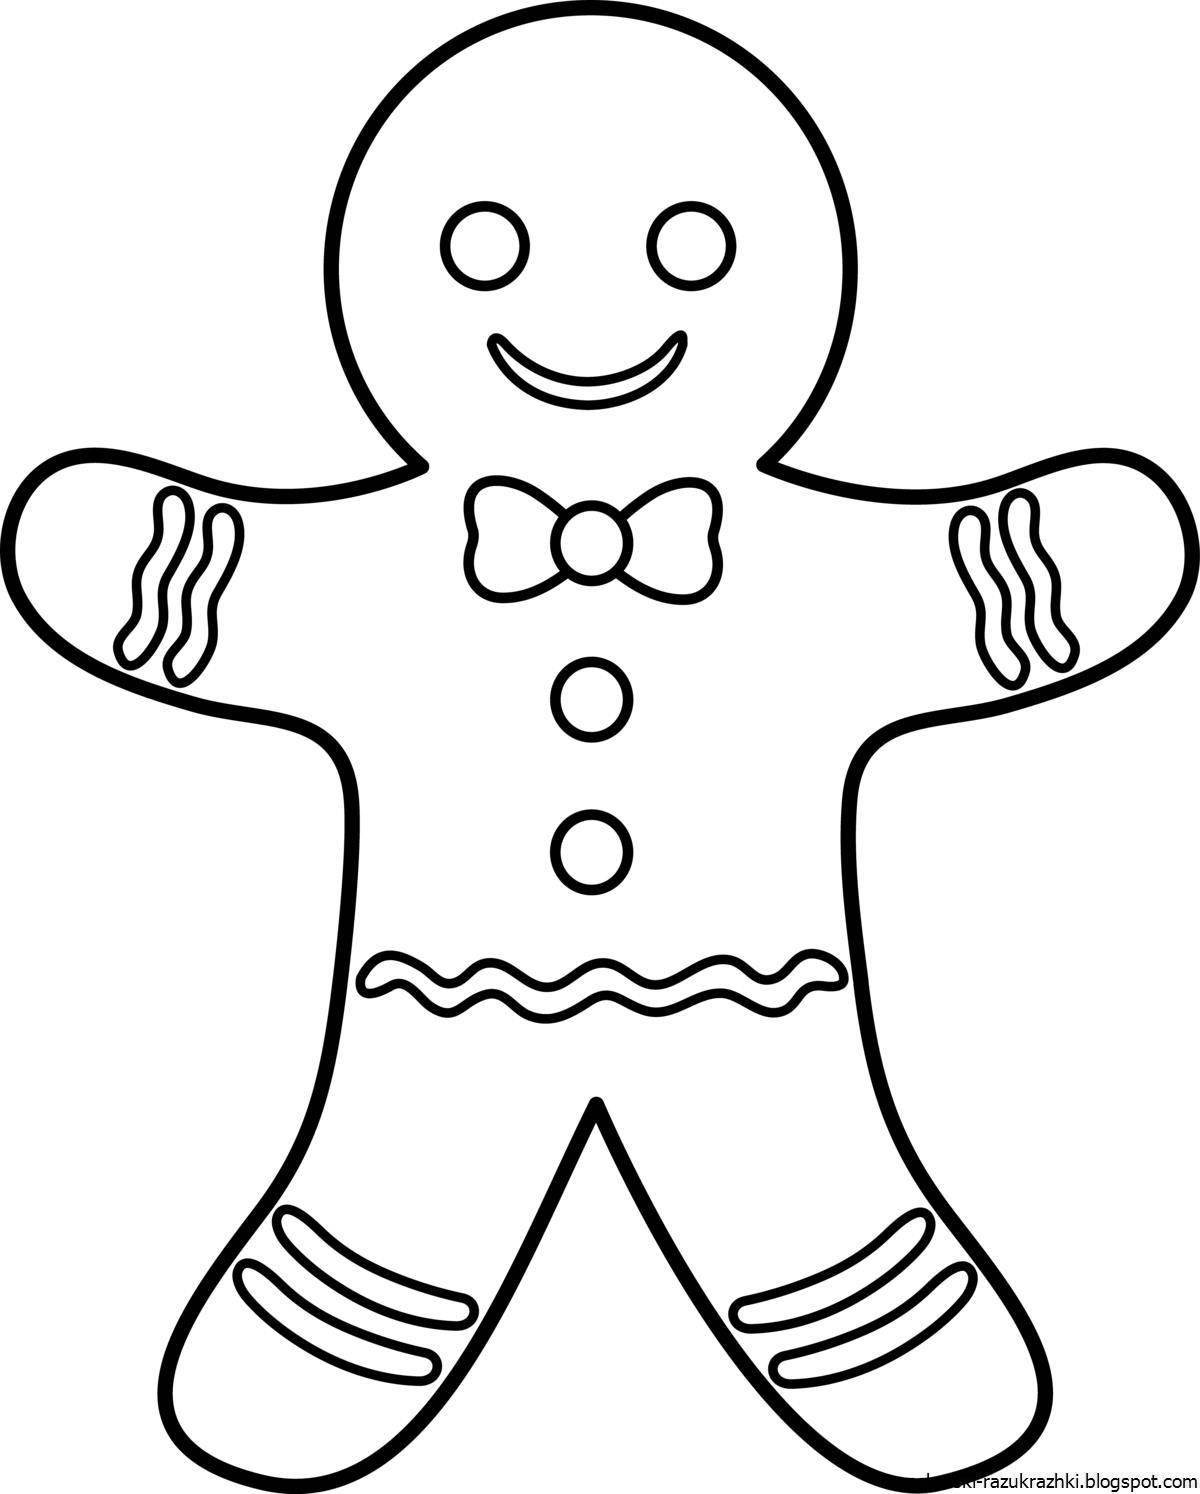 Joyful gingerbread coloring pages for kids